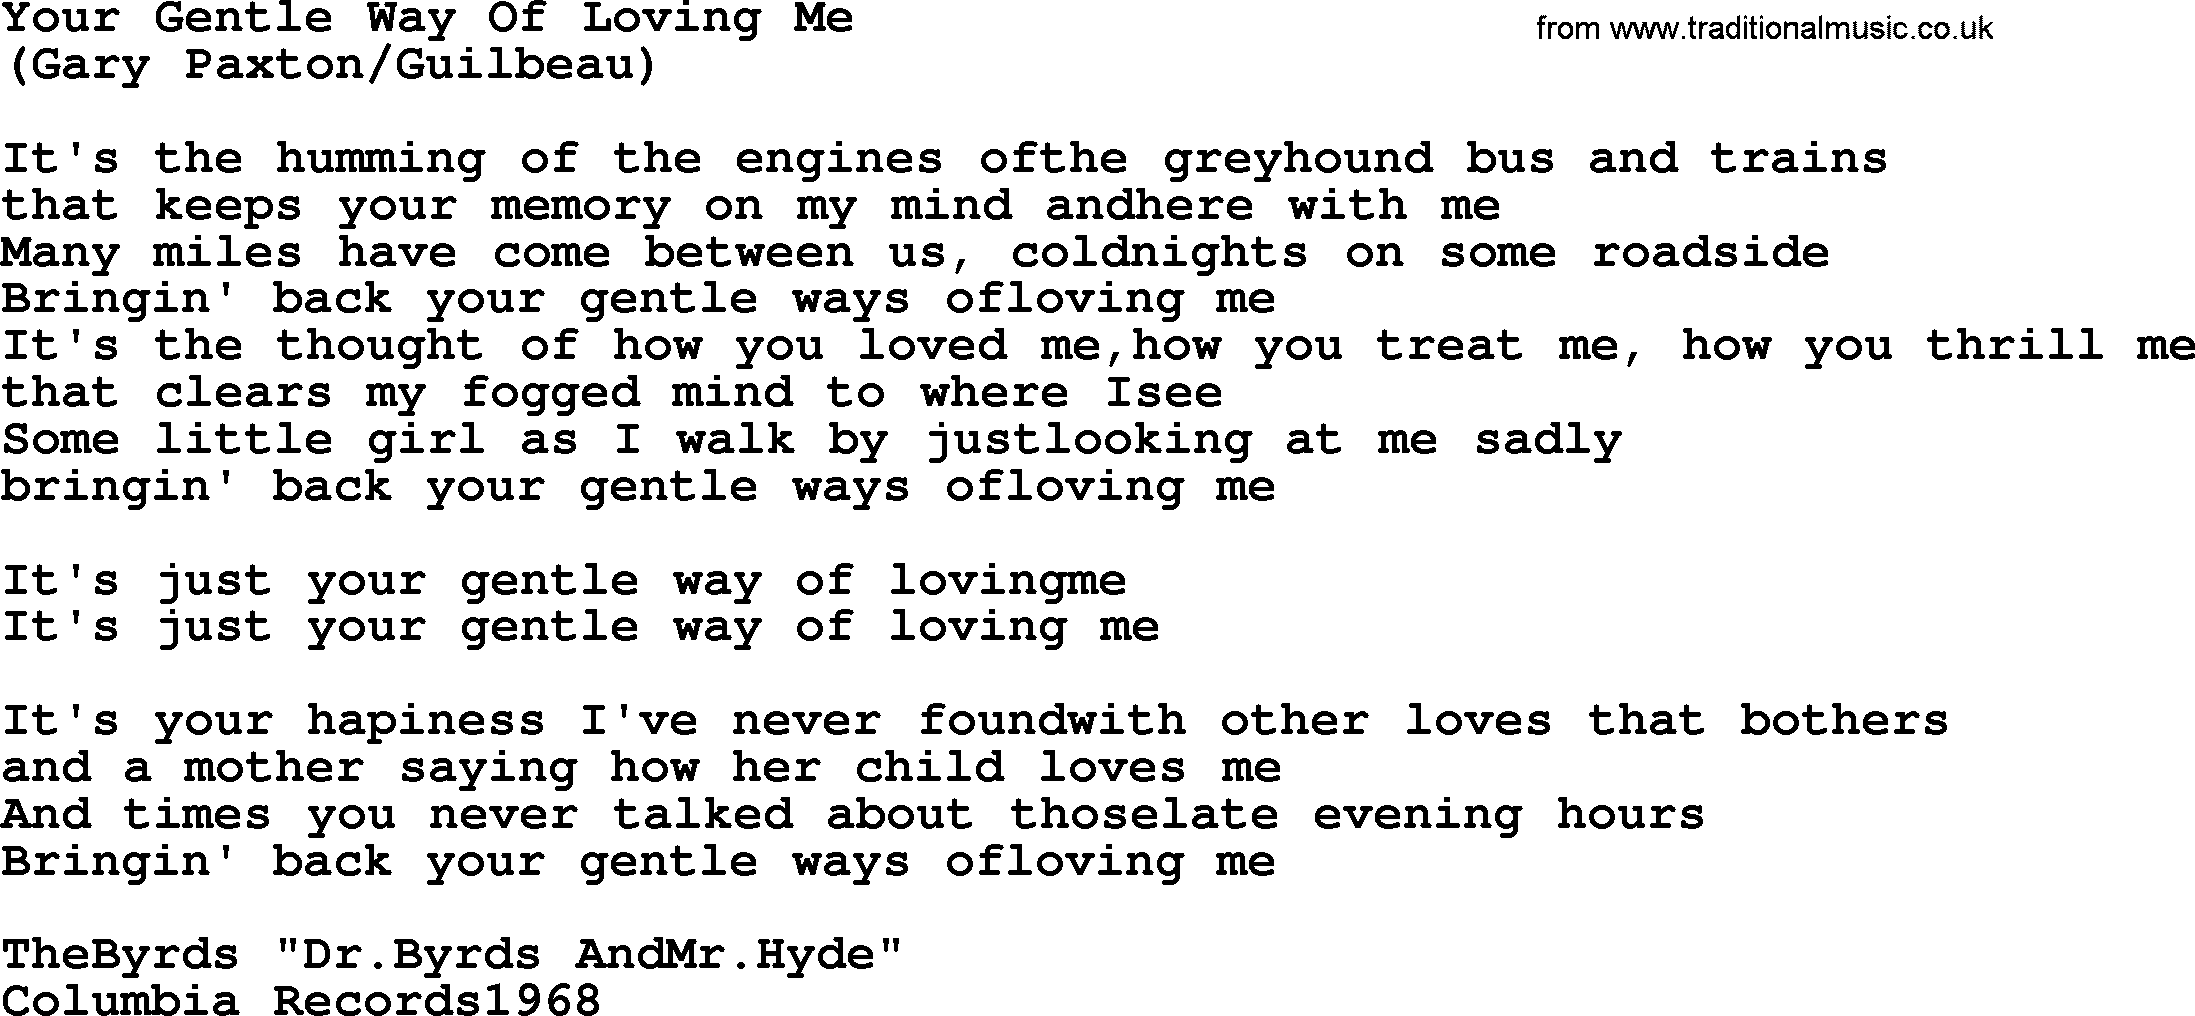 The Byrds song Your Gentle Way Of Loving Me, lyrics